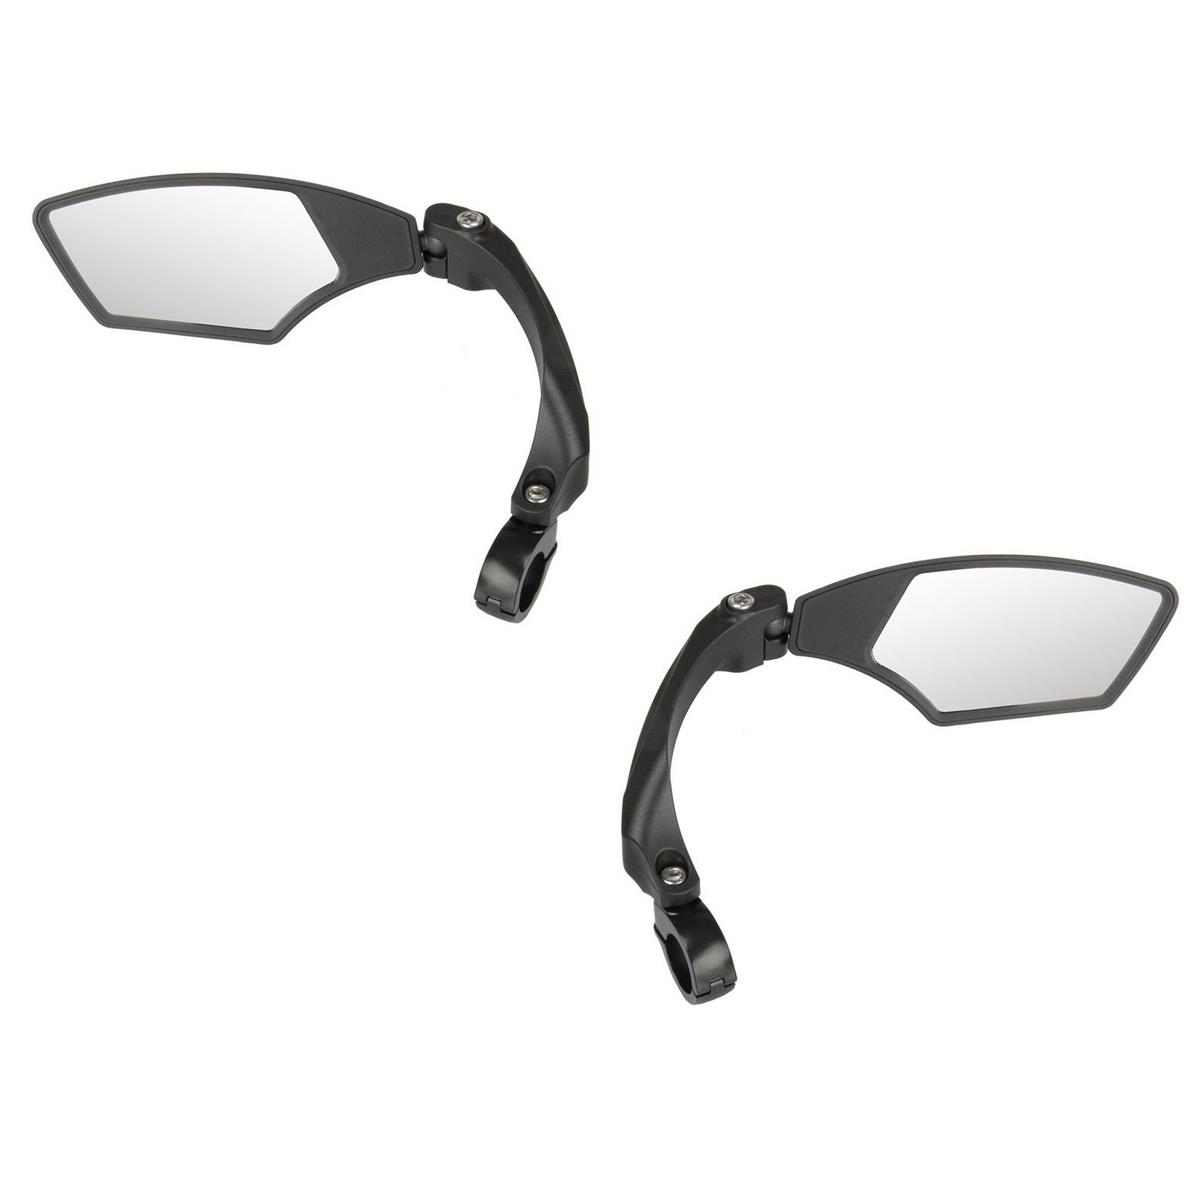 Left / Right Spy space mirror kit for bicycles